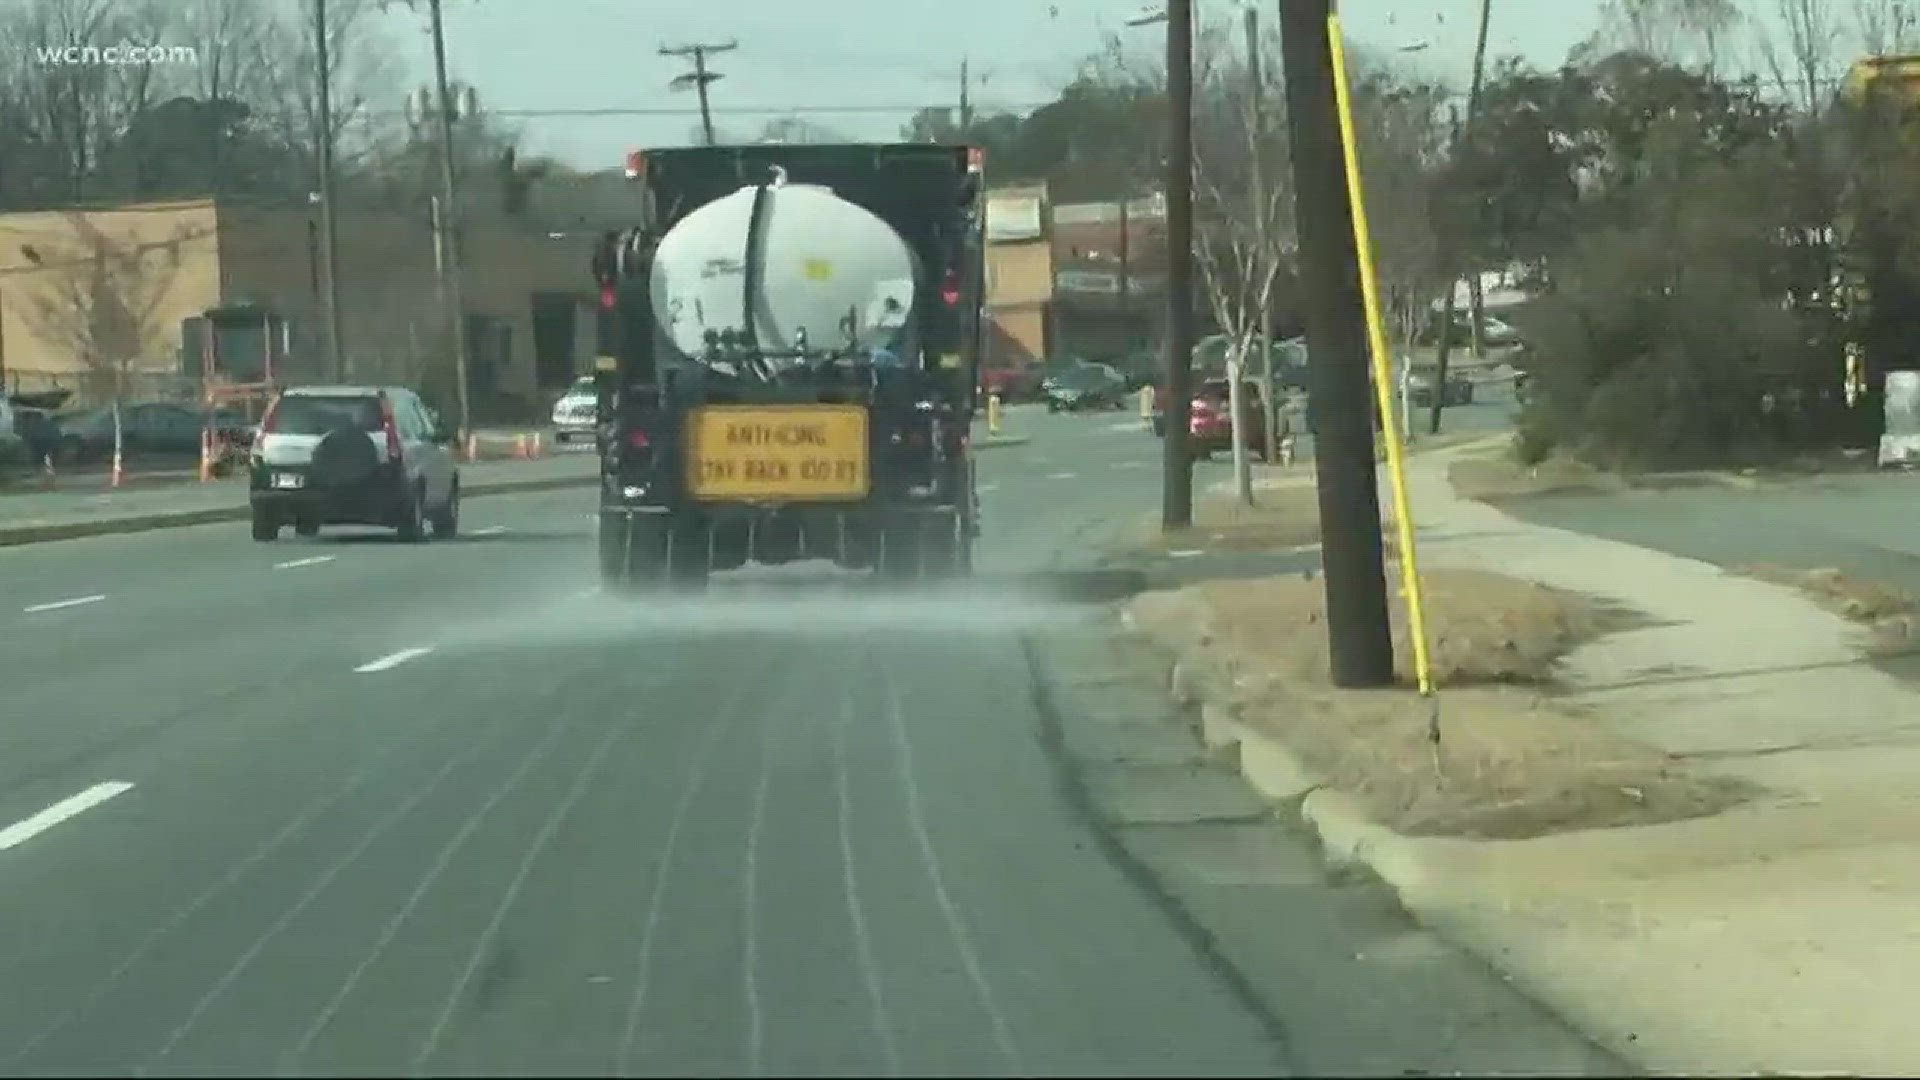 CMS cancels school as road crews prep for snow